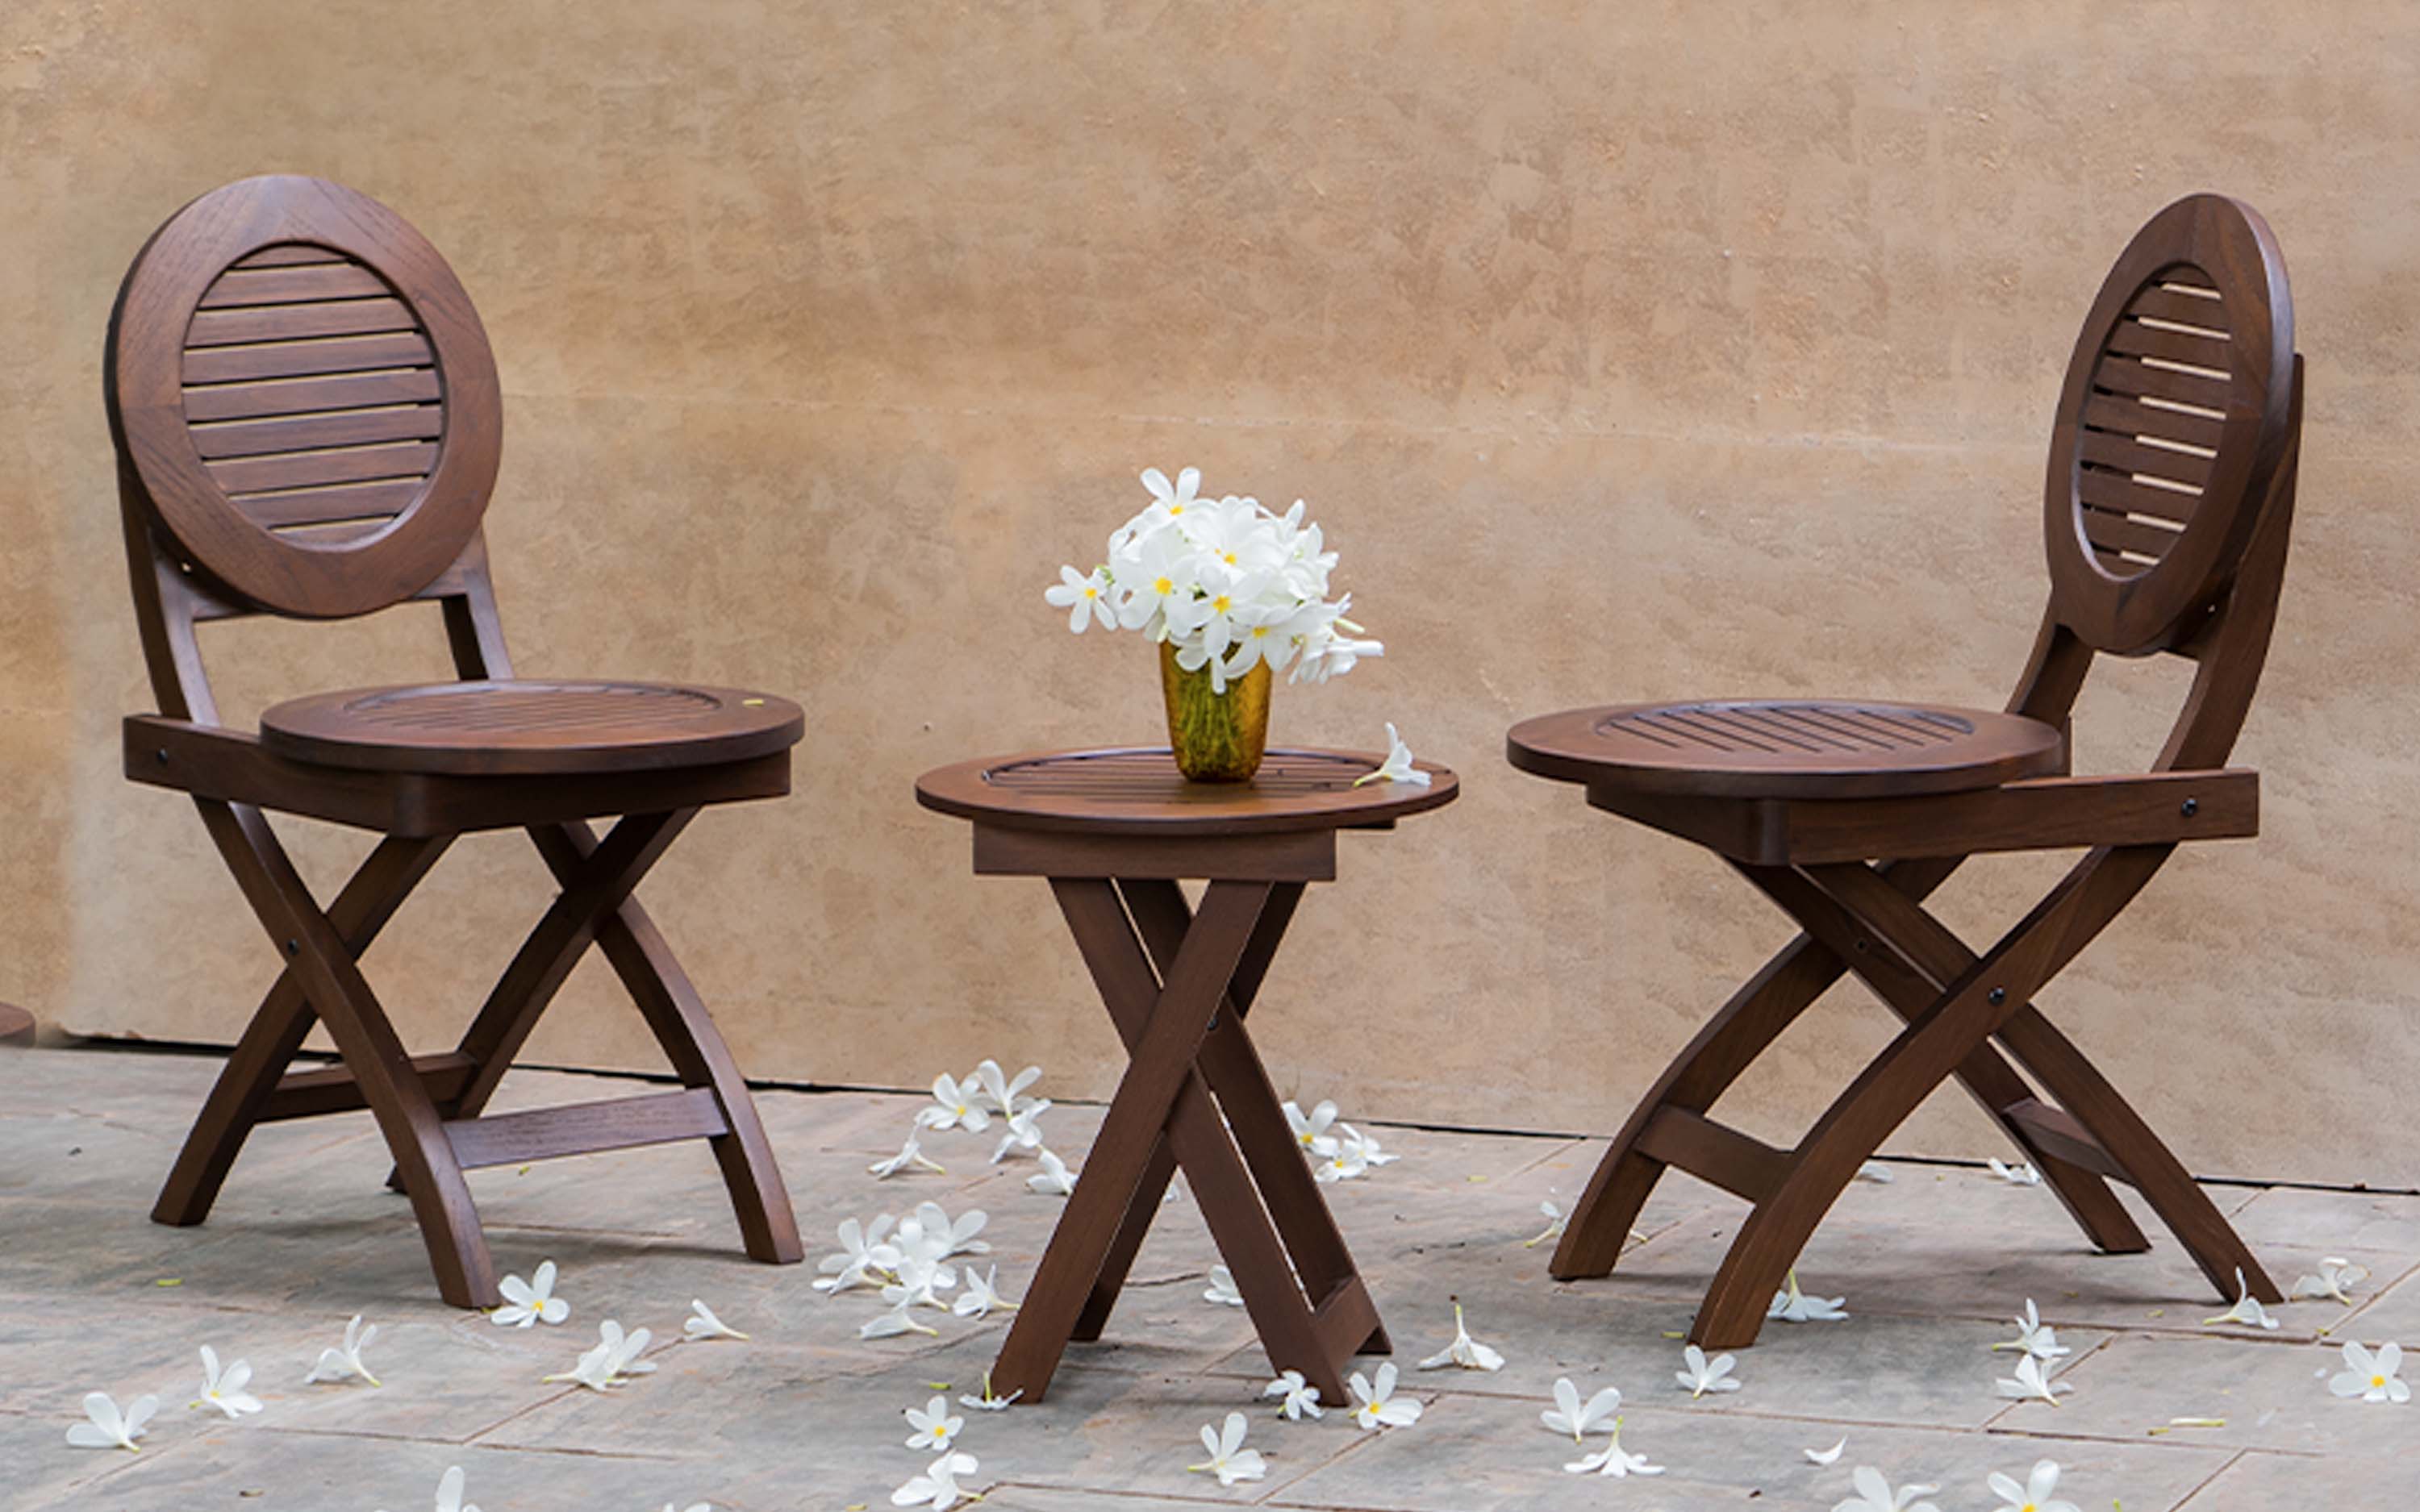 Alfresco Outdoor Folding Chairs with round stool. Unveil the ease of Stain-Free Furniture: Marvels that repel spills!